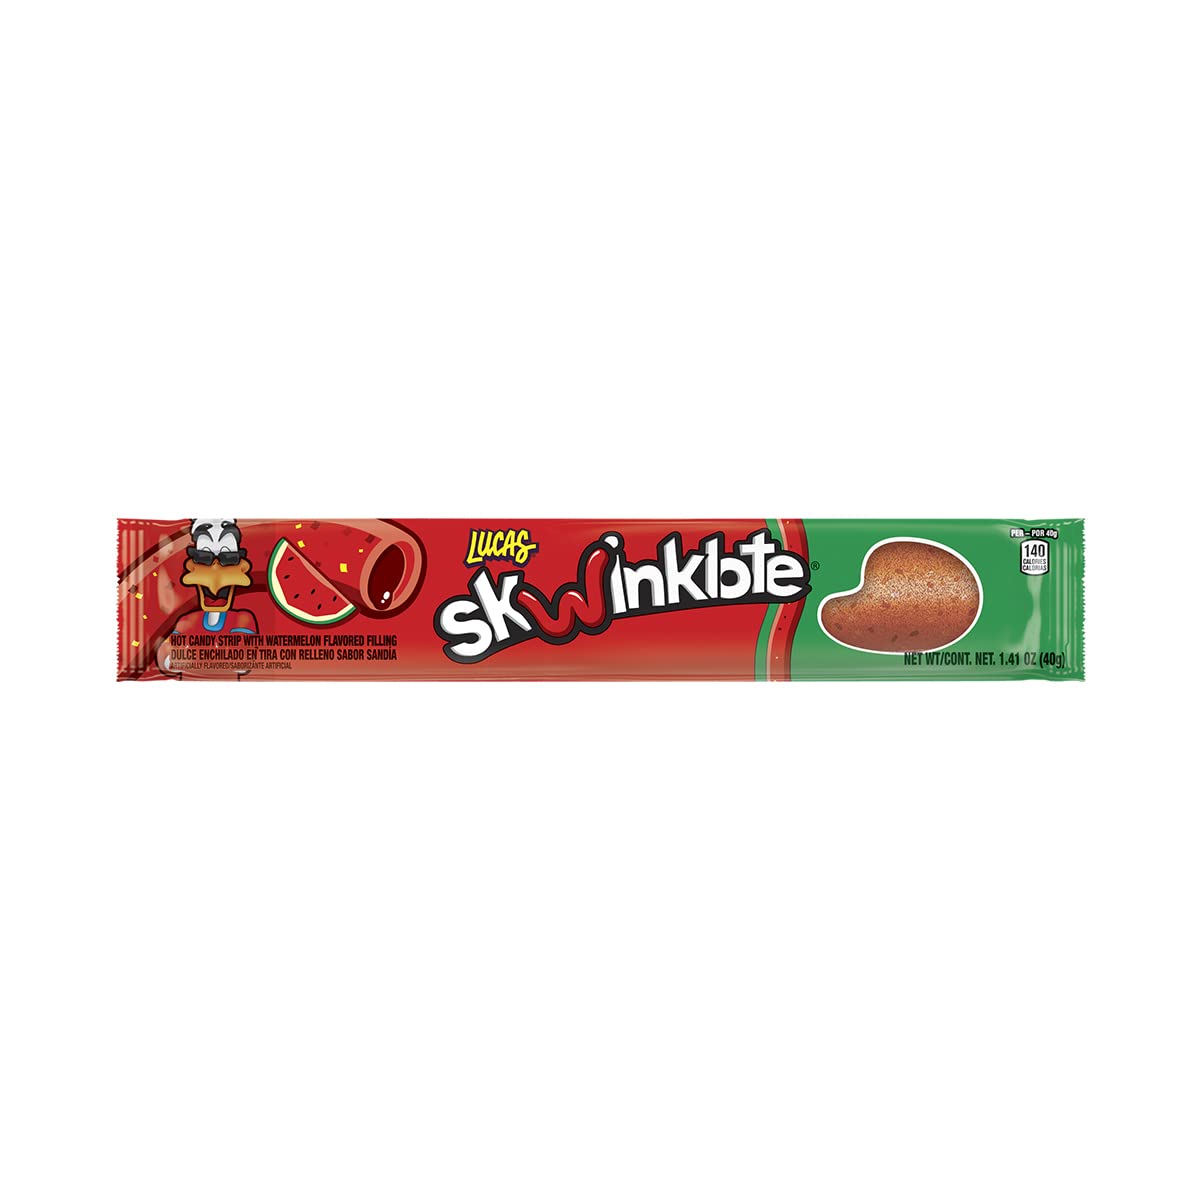 Lucas Skwinklote Watermelon Flavor Sweet and Sour Candy Stri